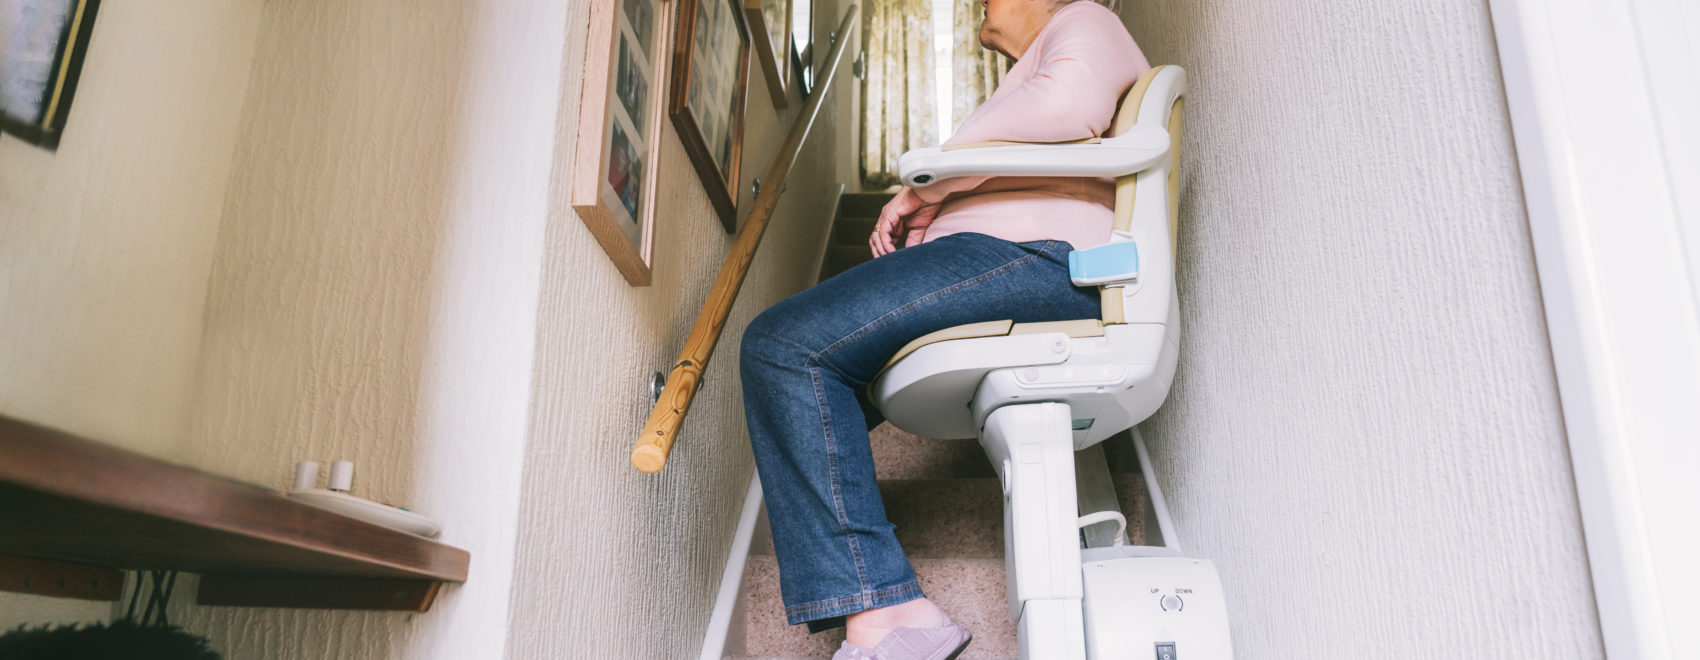 Senior woman using a used stairlift